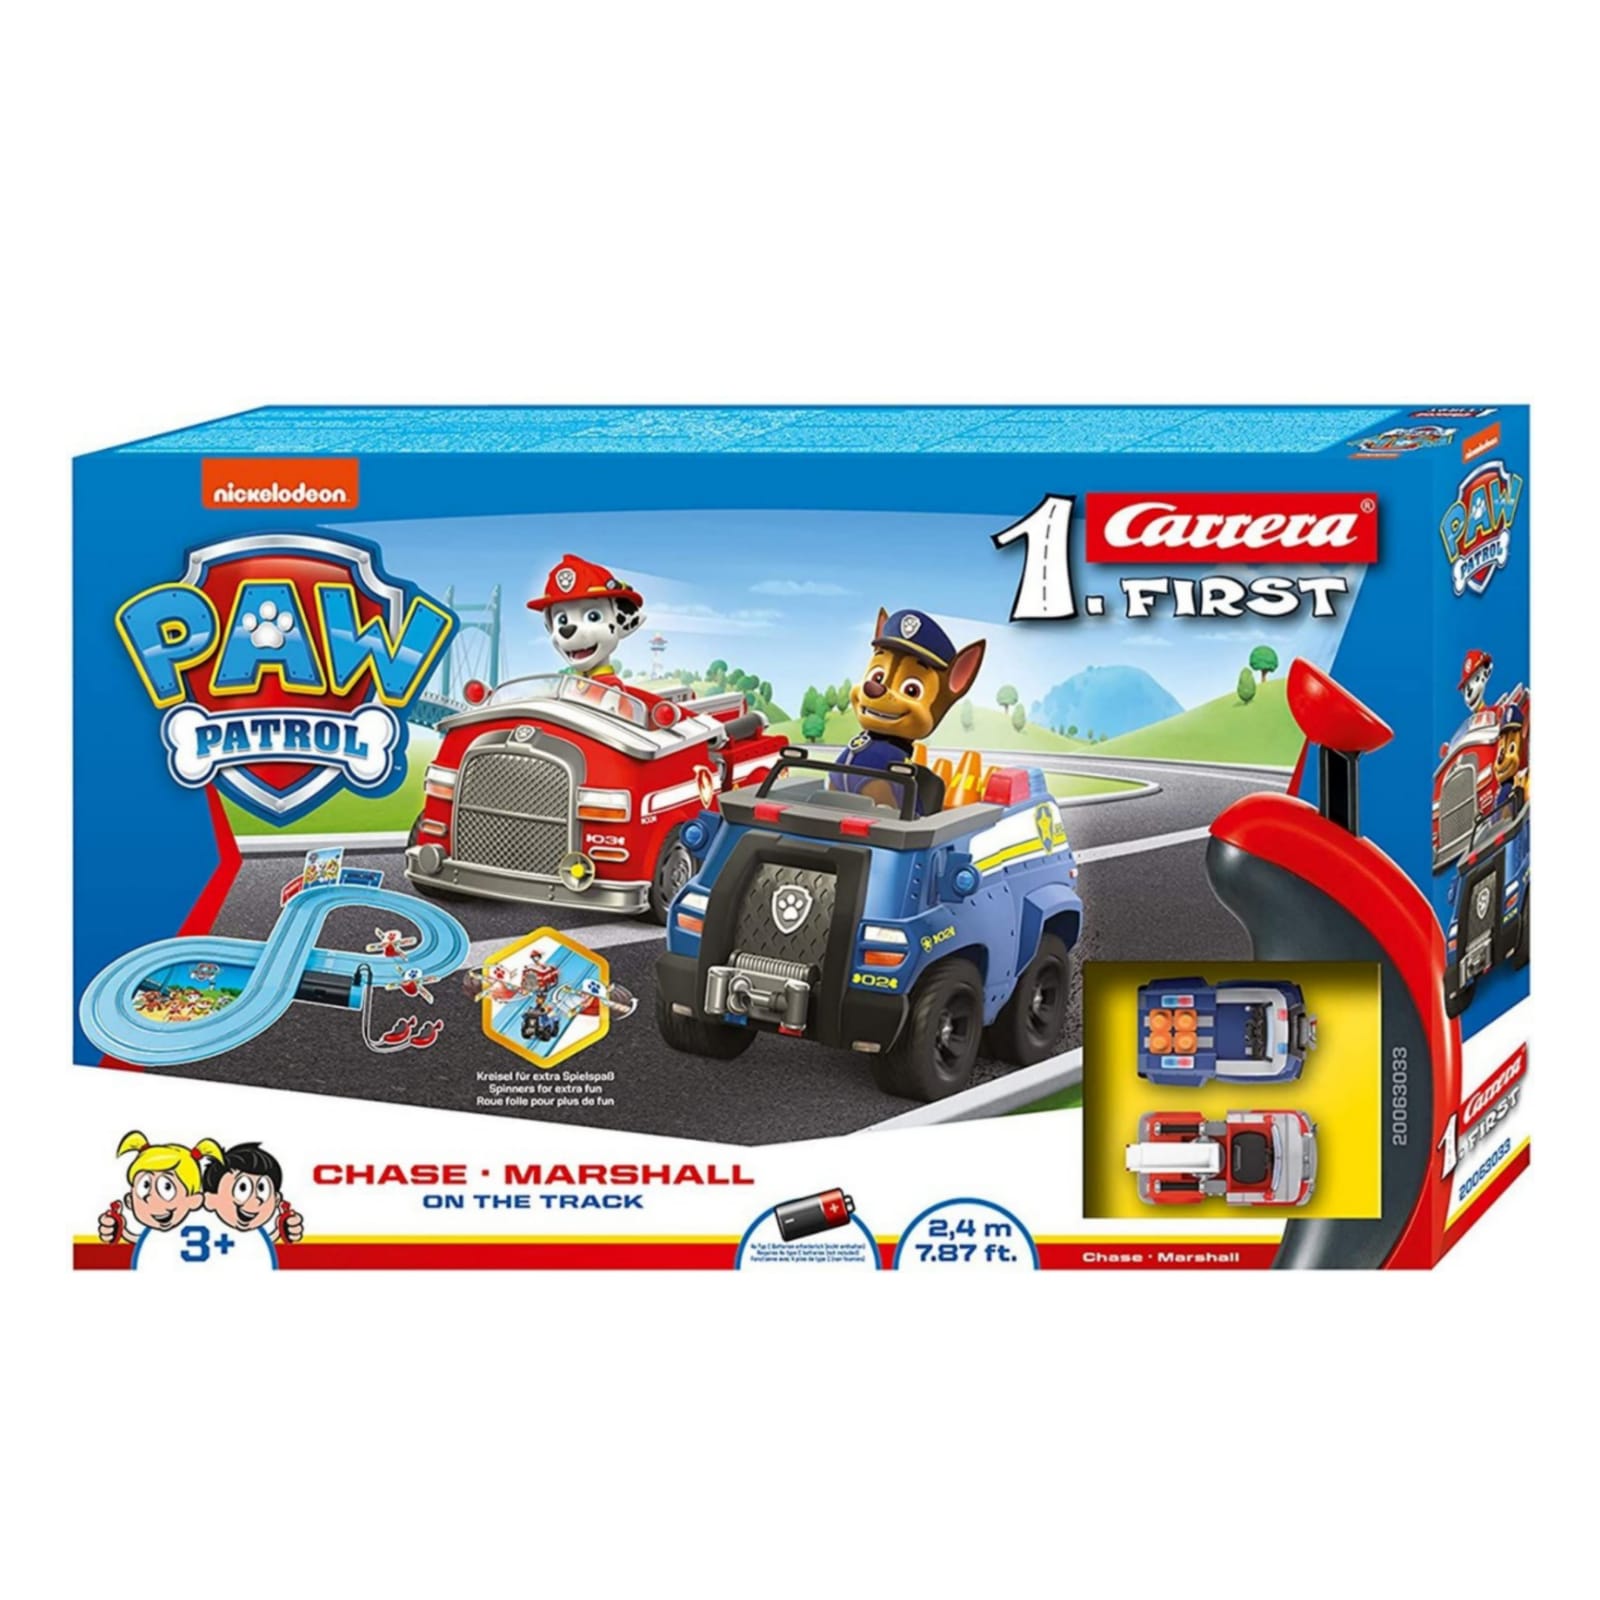 Carrera First Paw Patrol On the Track Slot Car Racing Race Set 63033 NEW 